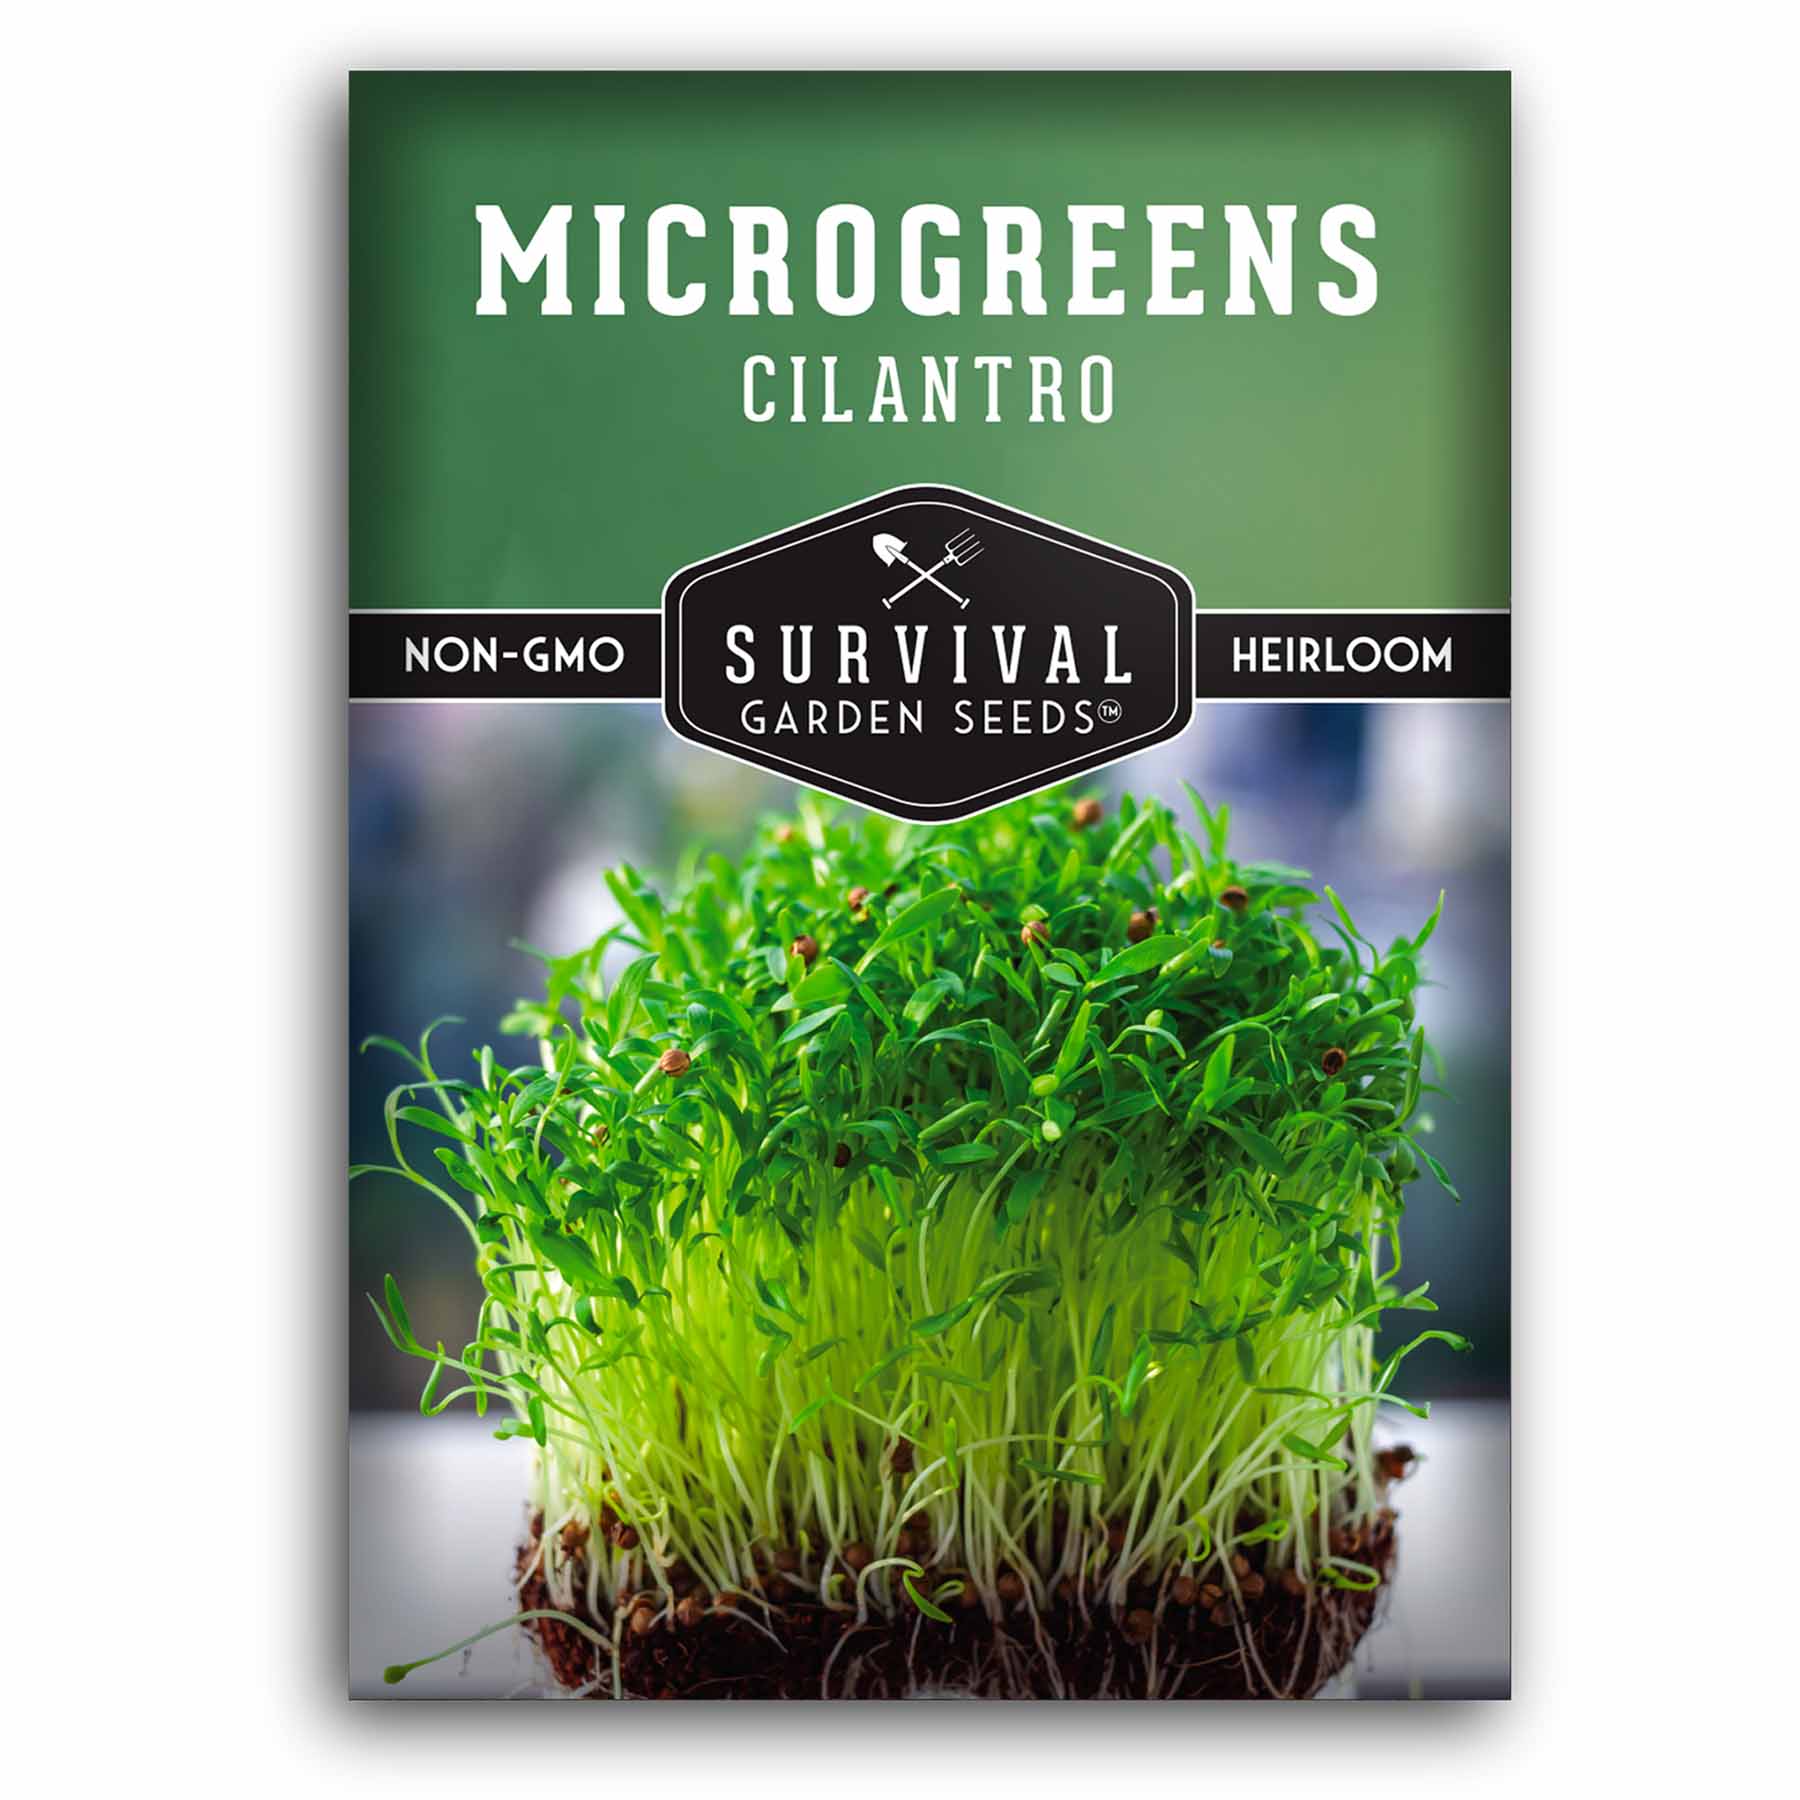 1 packet of Cilantro Microgreens seeds